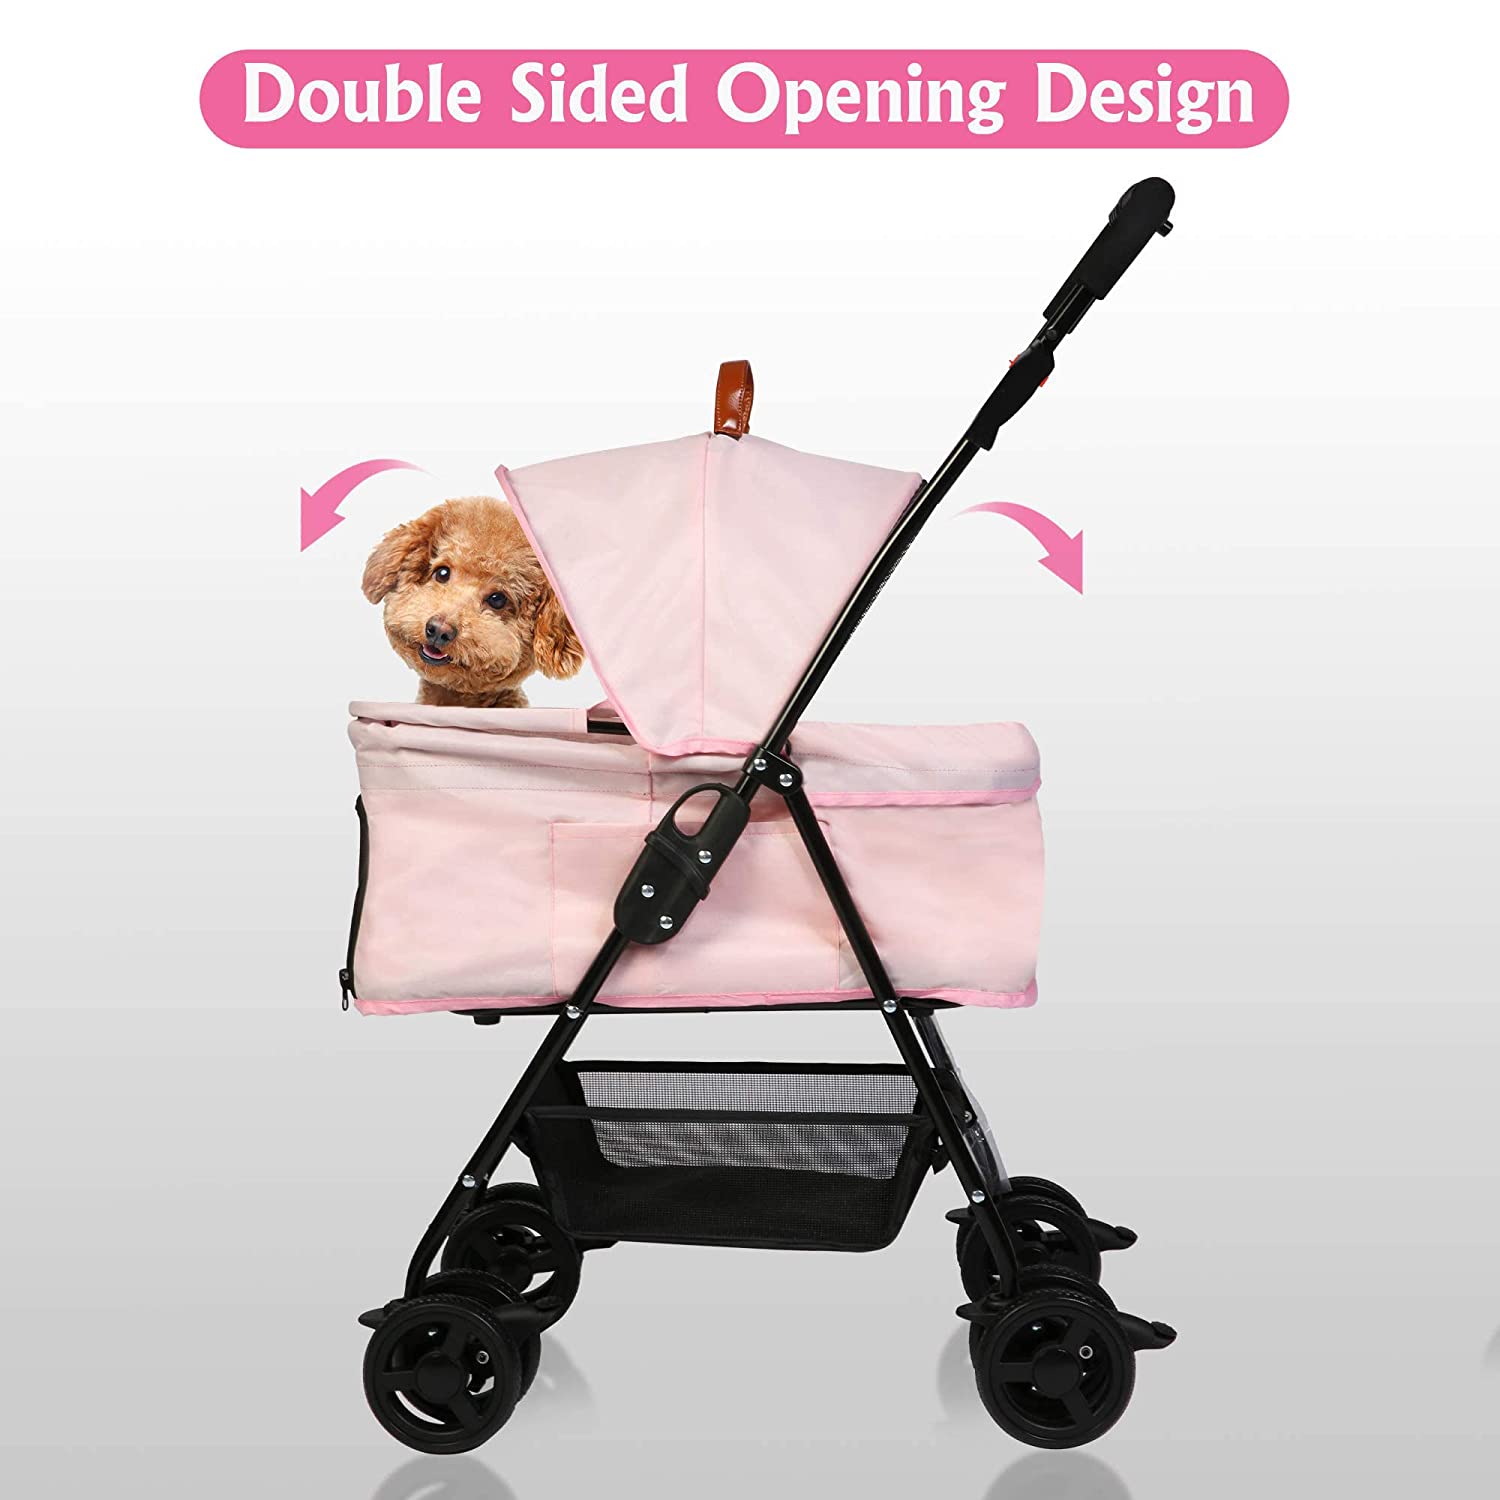 Foldable Pet Stroller with Detachable Carrier & Cup Holder for Small Dog/Cat, Pink